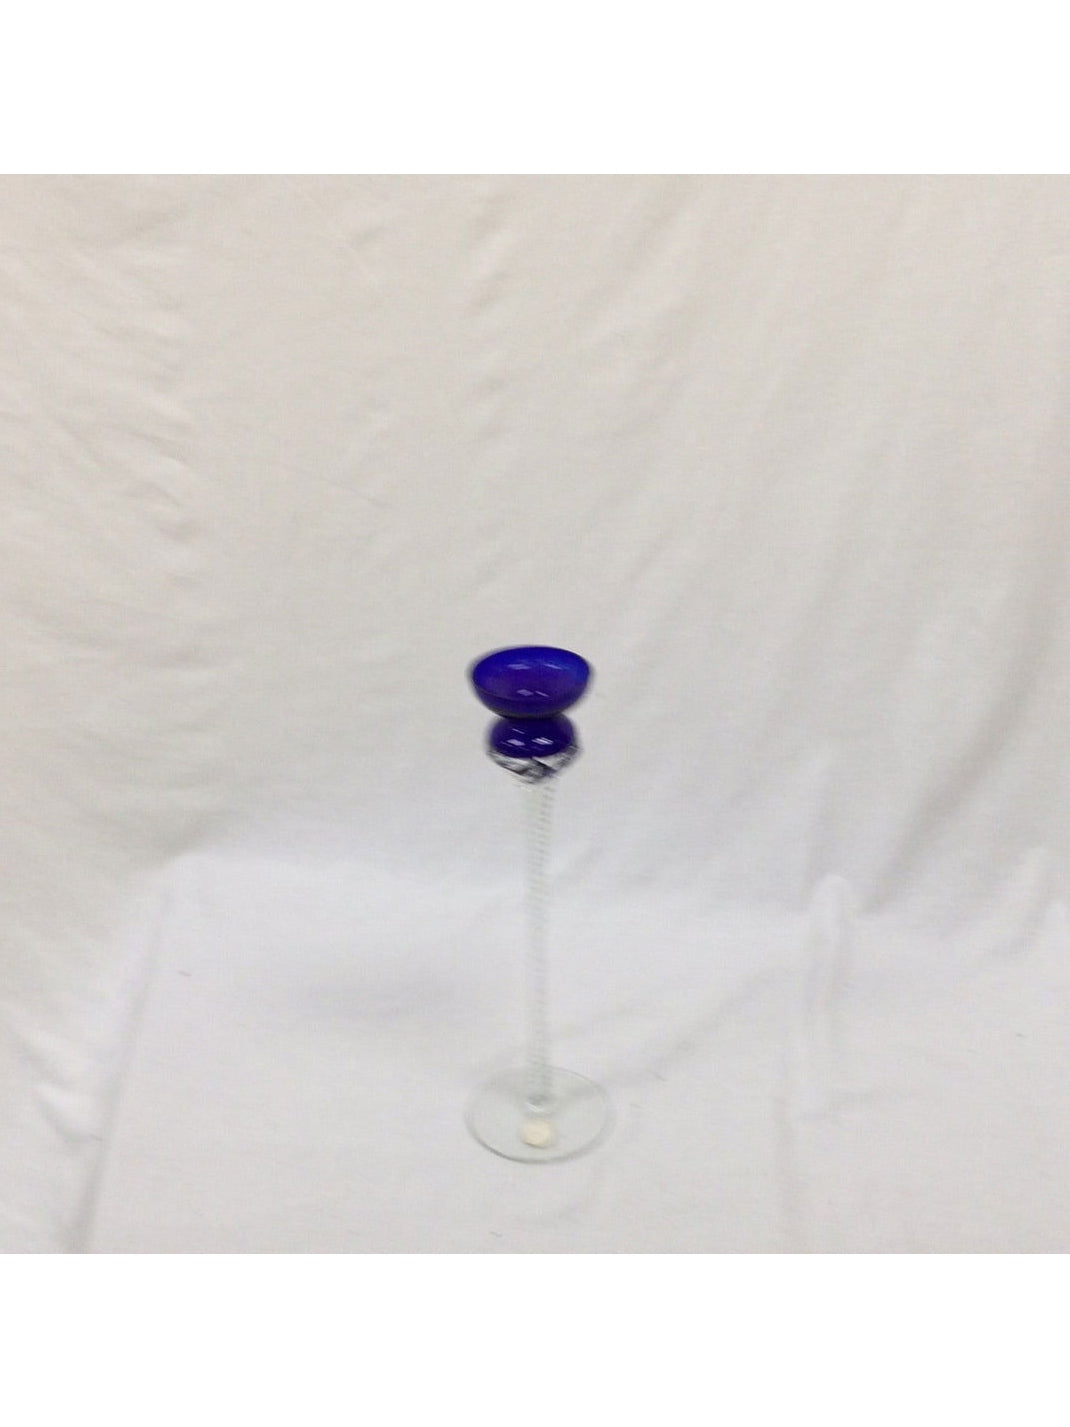 Crystal Clear Handcrafted Crystal Long Stem Goblet / Bud Vase - The Kennedy Collective Thrift - 